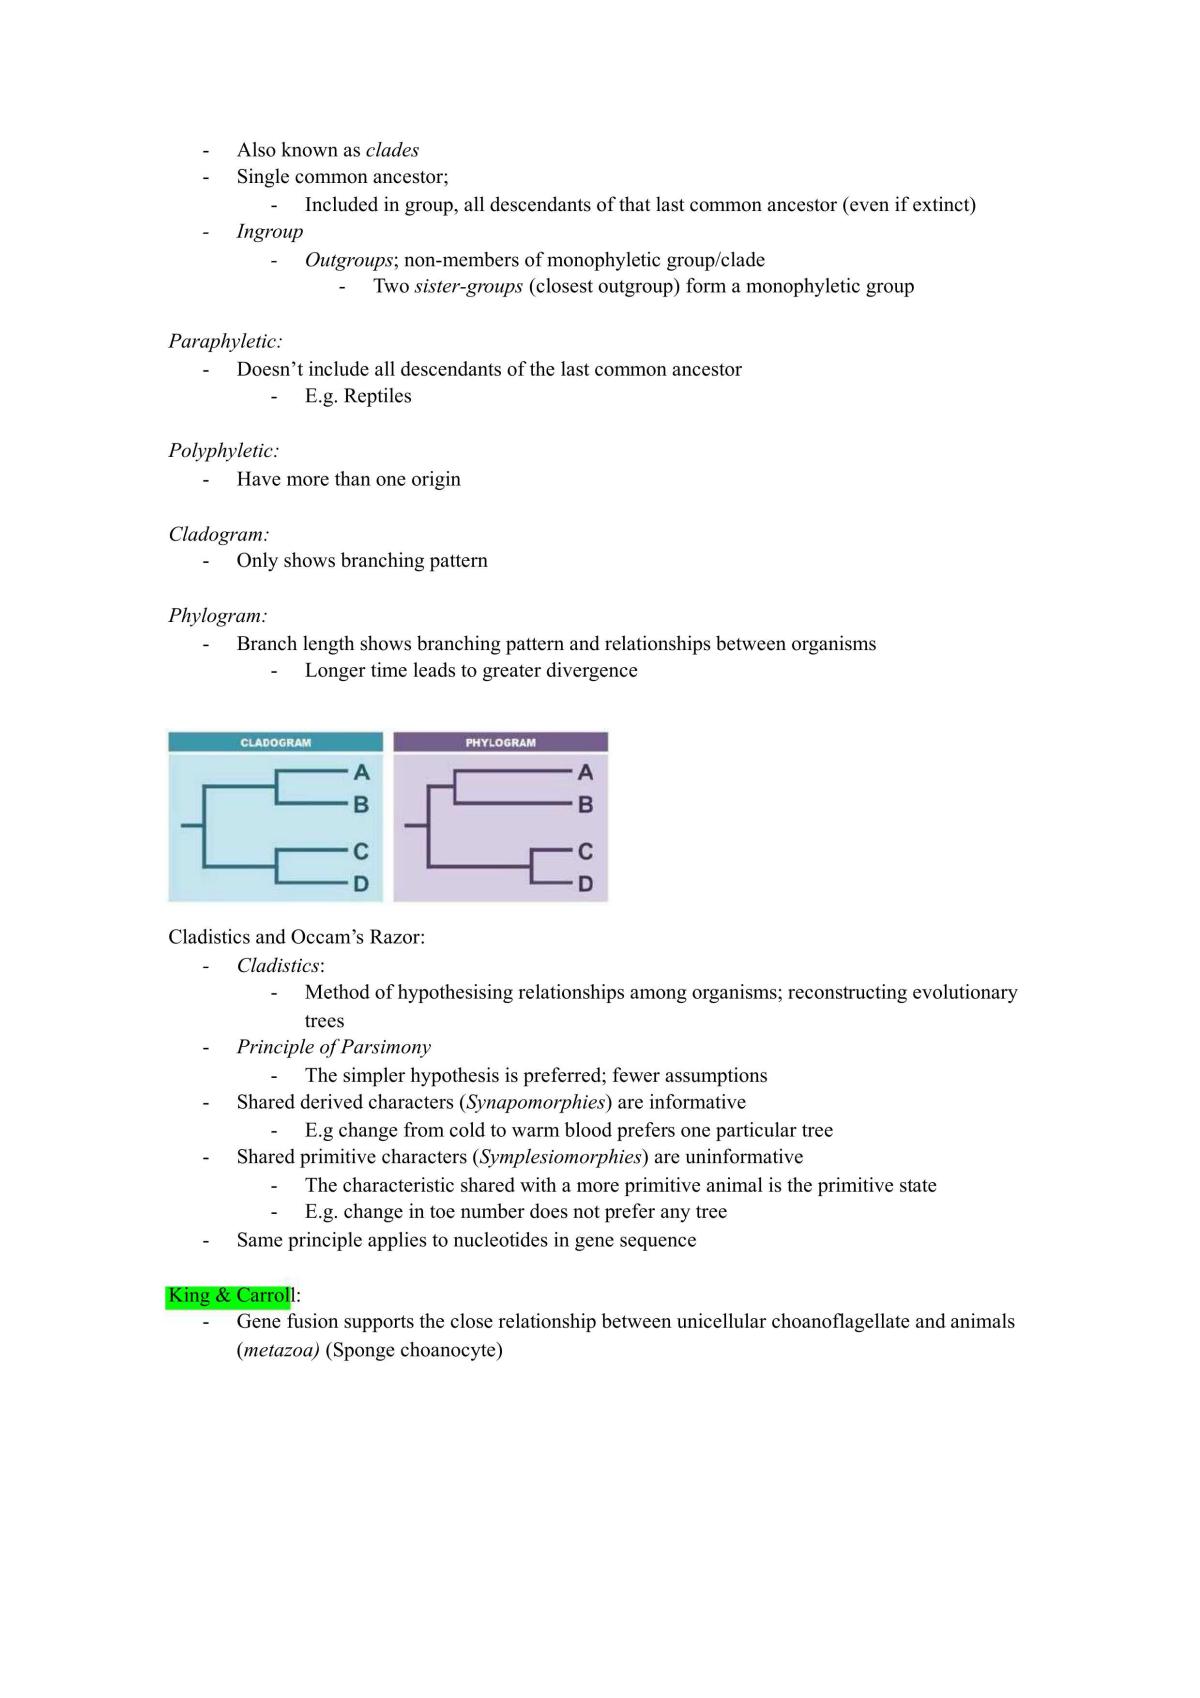 Life on Earth Course Notes - Page 2